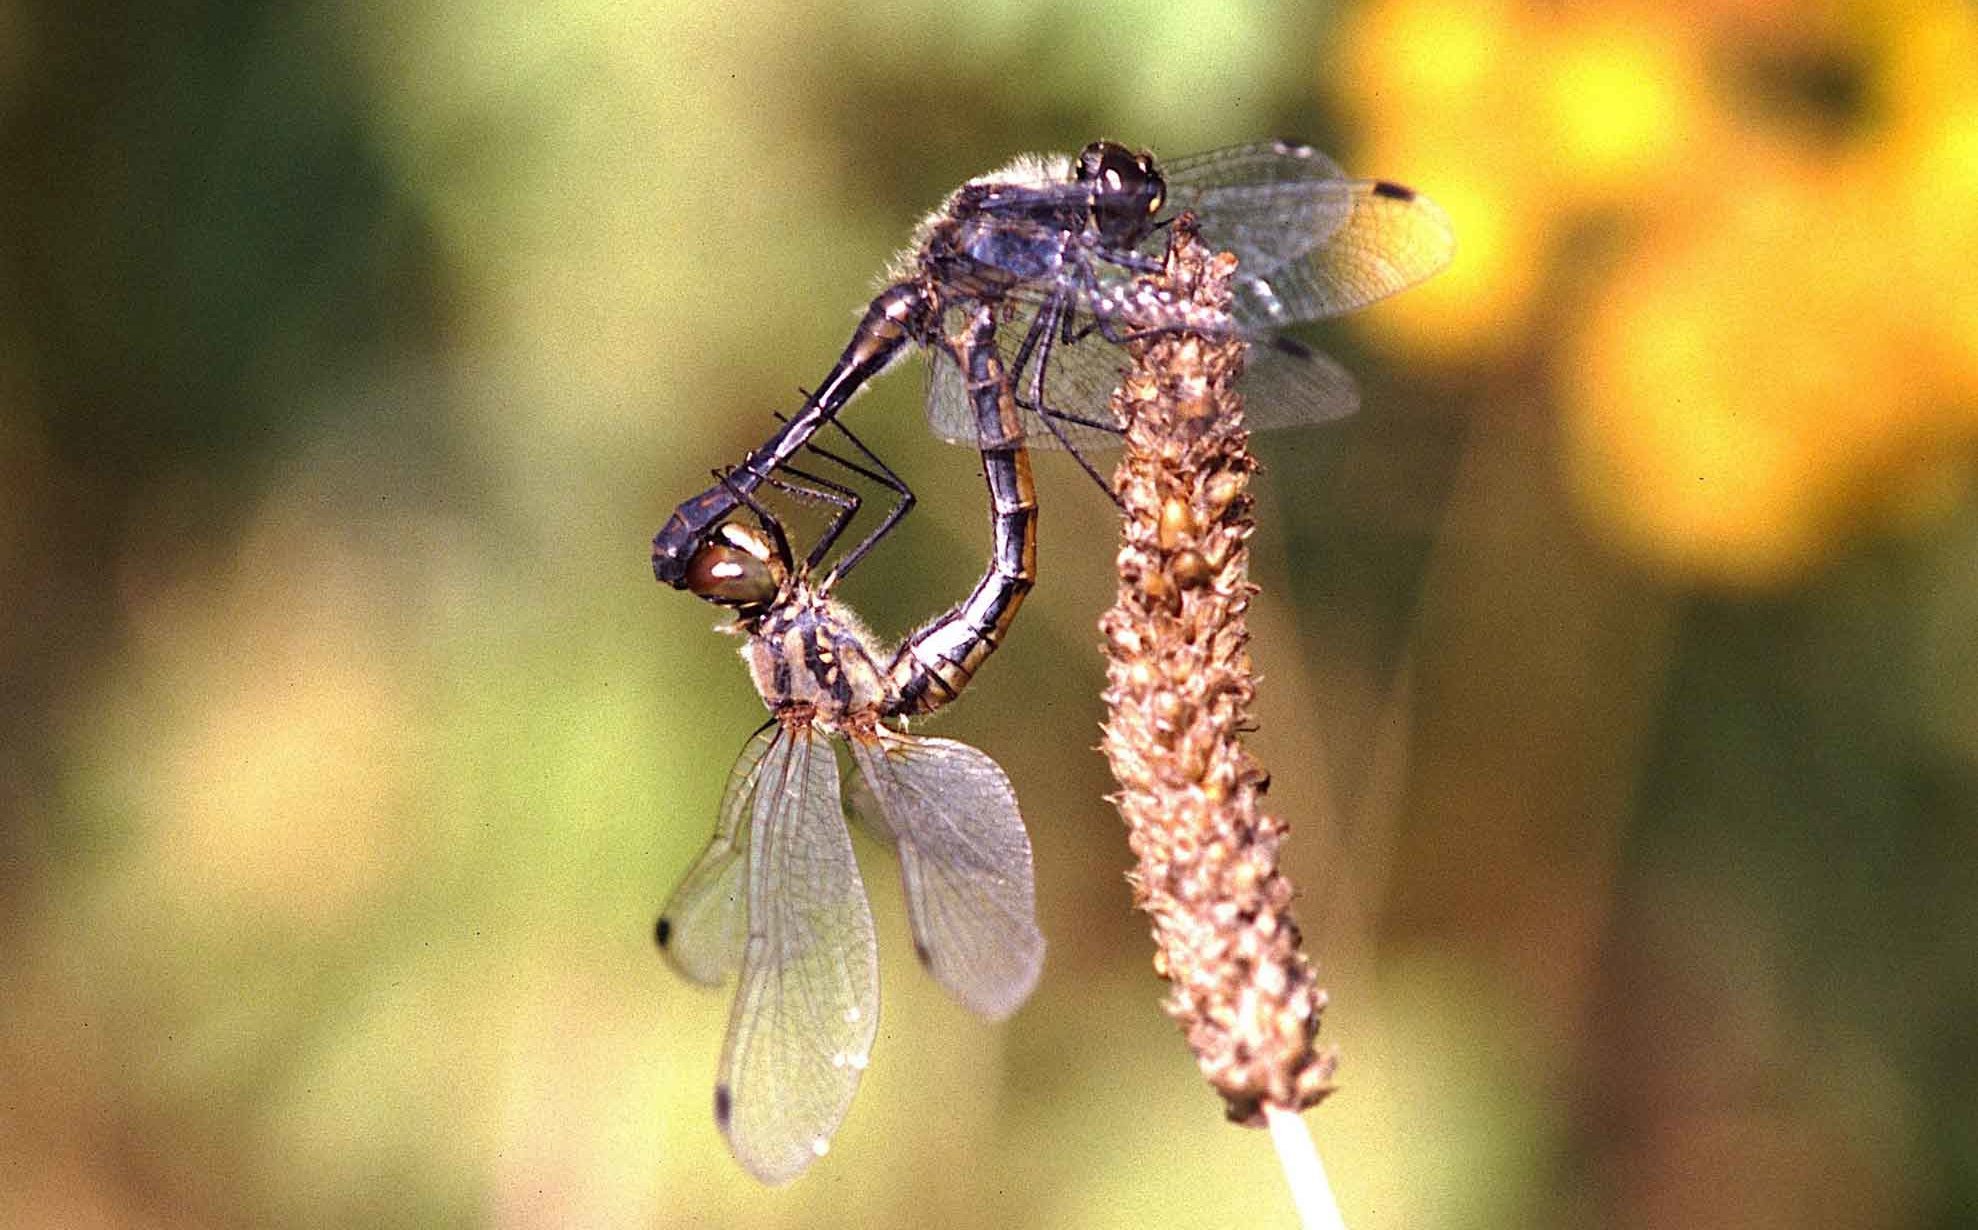 Insect change among dragonflies in Germany